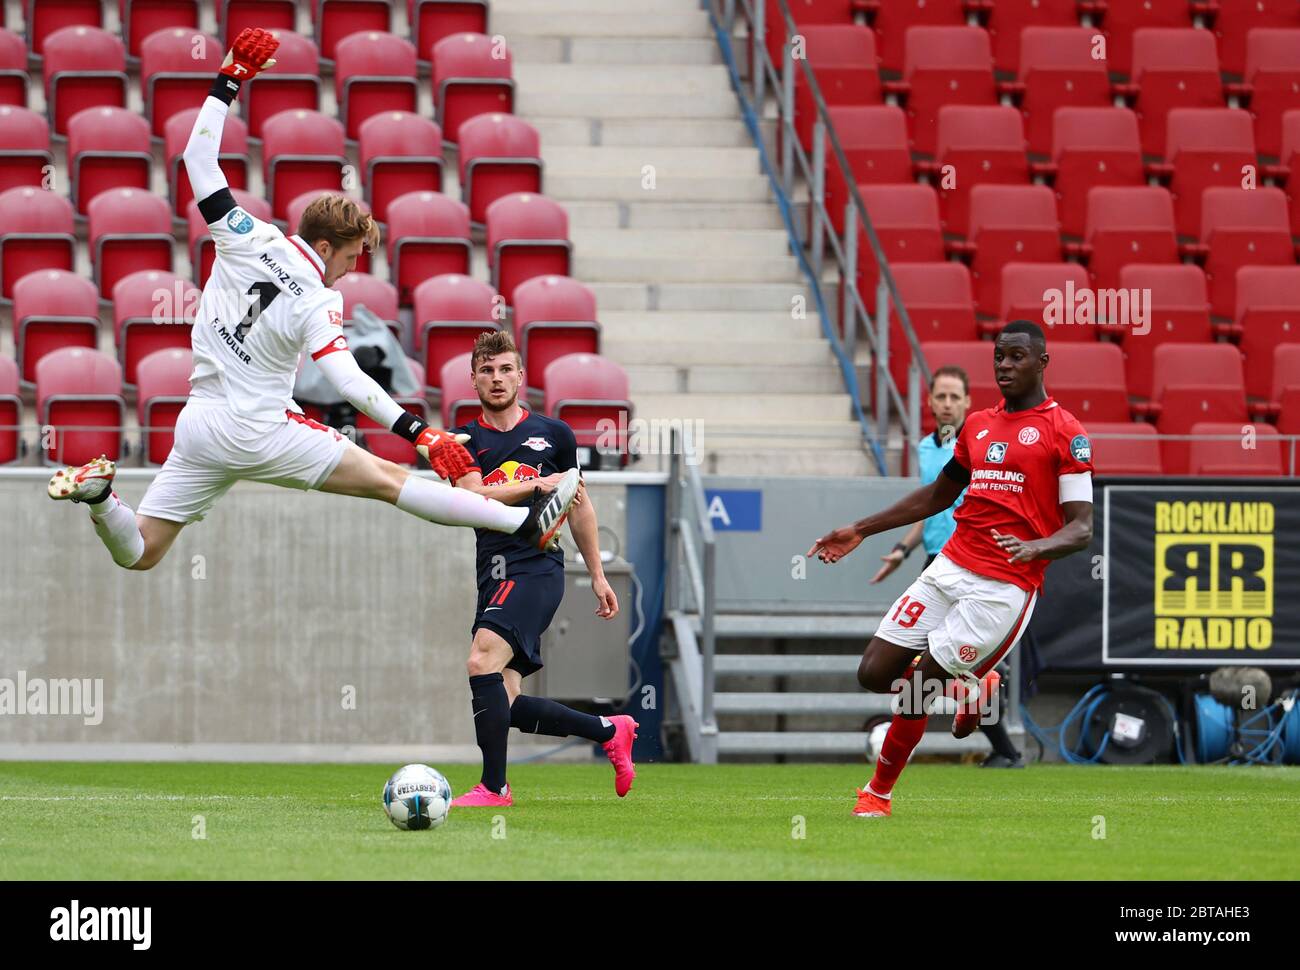 Mainz, Germany. 24th May, 2020. Football: Bundesliga, FSV Mainz 05 - RB  Leipzig, 27th day of play, in the Opel Arena. Timo Werner (M) from Leipzig  in action alongside Moussa Niakhate (r)